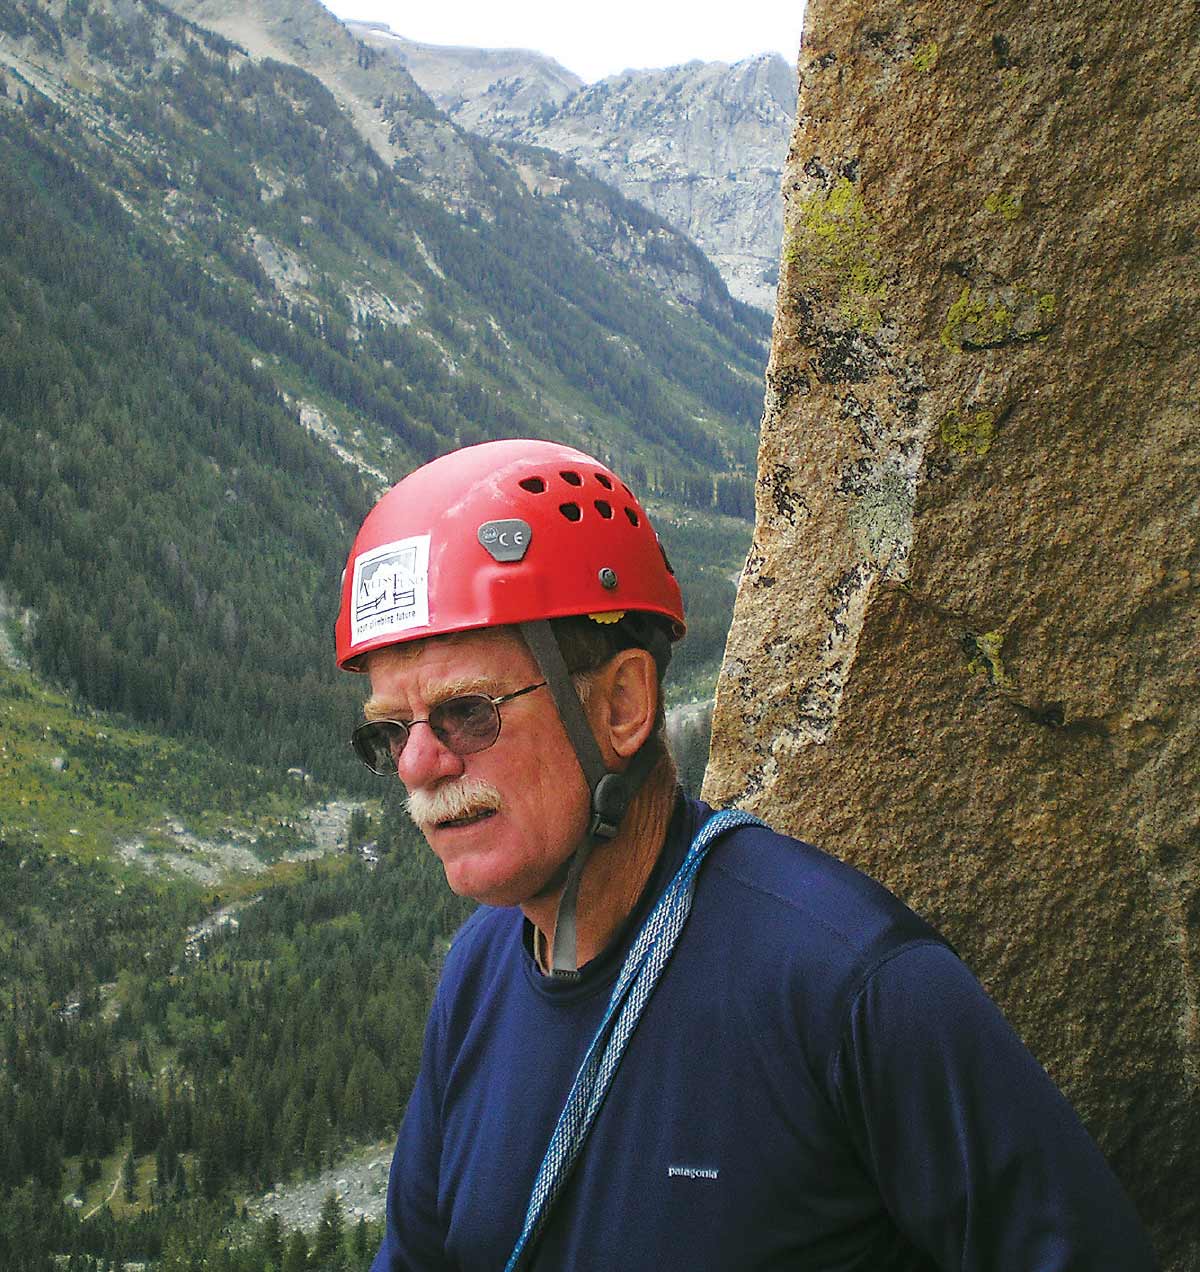 David Thoenen in a red helmet, sunglasses, and a navy shirt, with mountains in the background